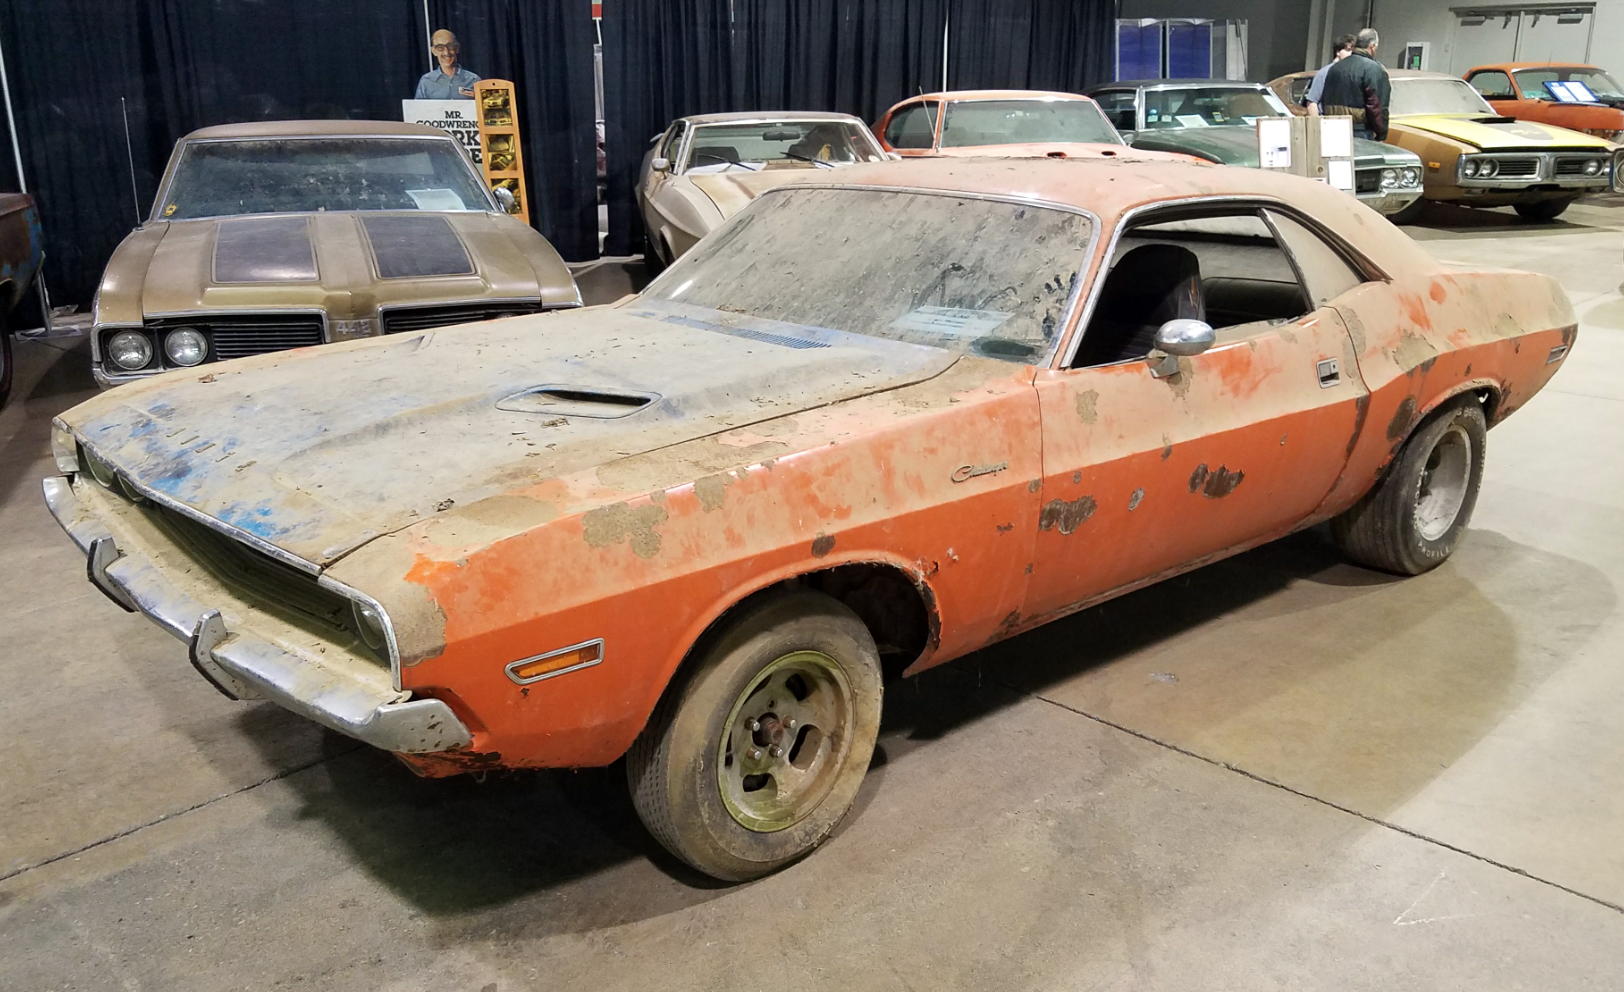 Barn Finds And Hidden Gems At The 2018 Muscle Car And Corvette Nationals The Daily Drive Consumer Guide The Daily Drive Consumer Guide